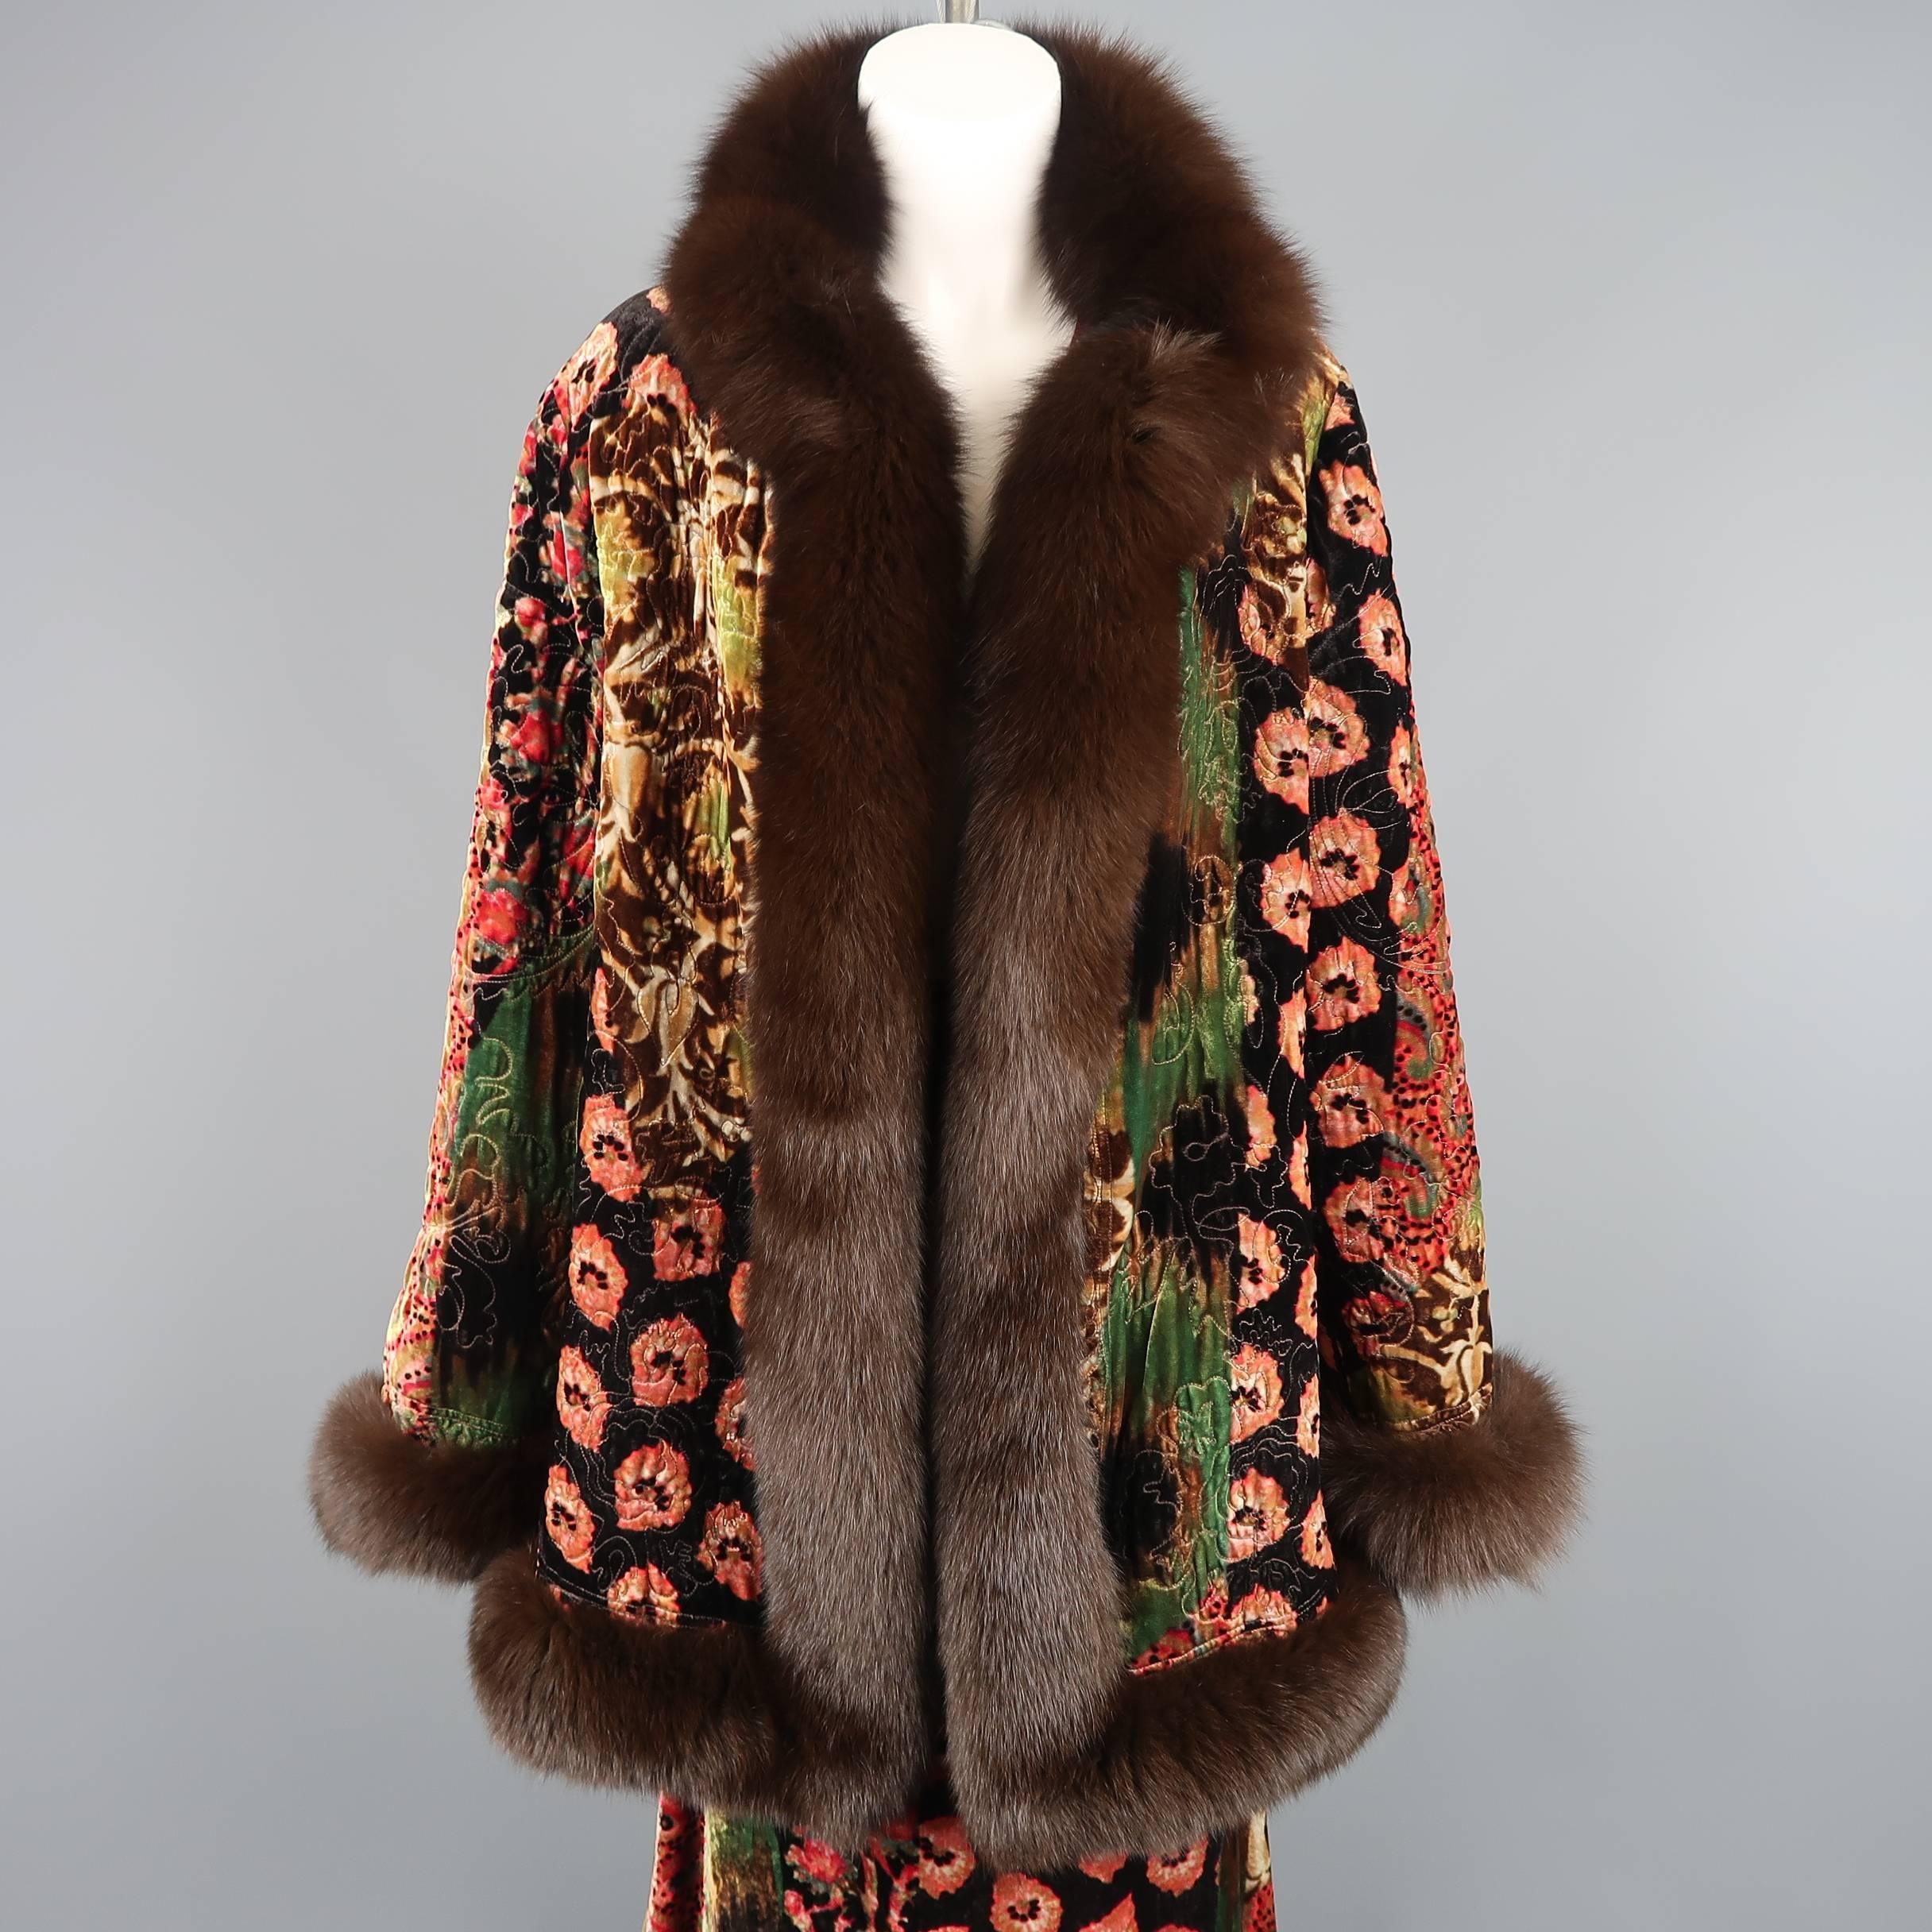 Vintage OSCAR DE LA RENTA evening ensemble comes in a mixed paisley floral print silk blend velvet and includes a quilted open coat with brown fox fur trim and matching A ling skirt with fur trimmed hem. Made in USA.
 
Excellent Pre-Owned